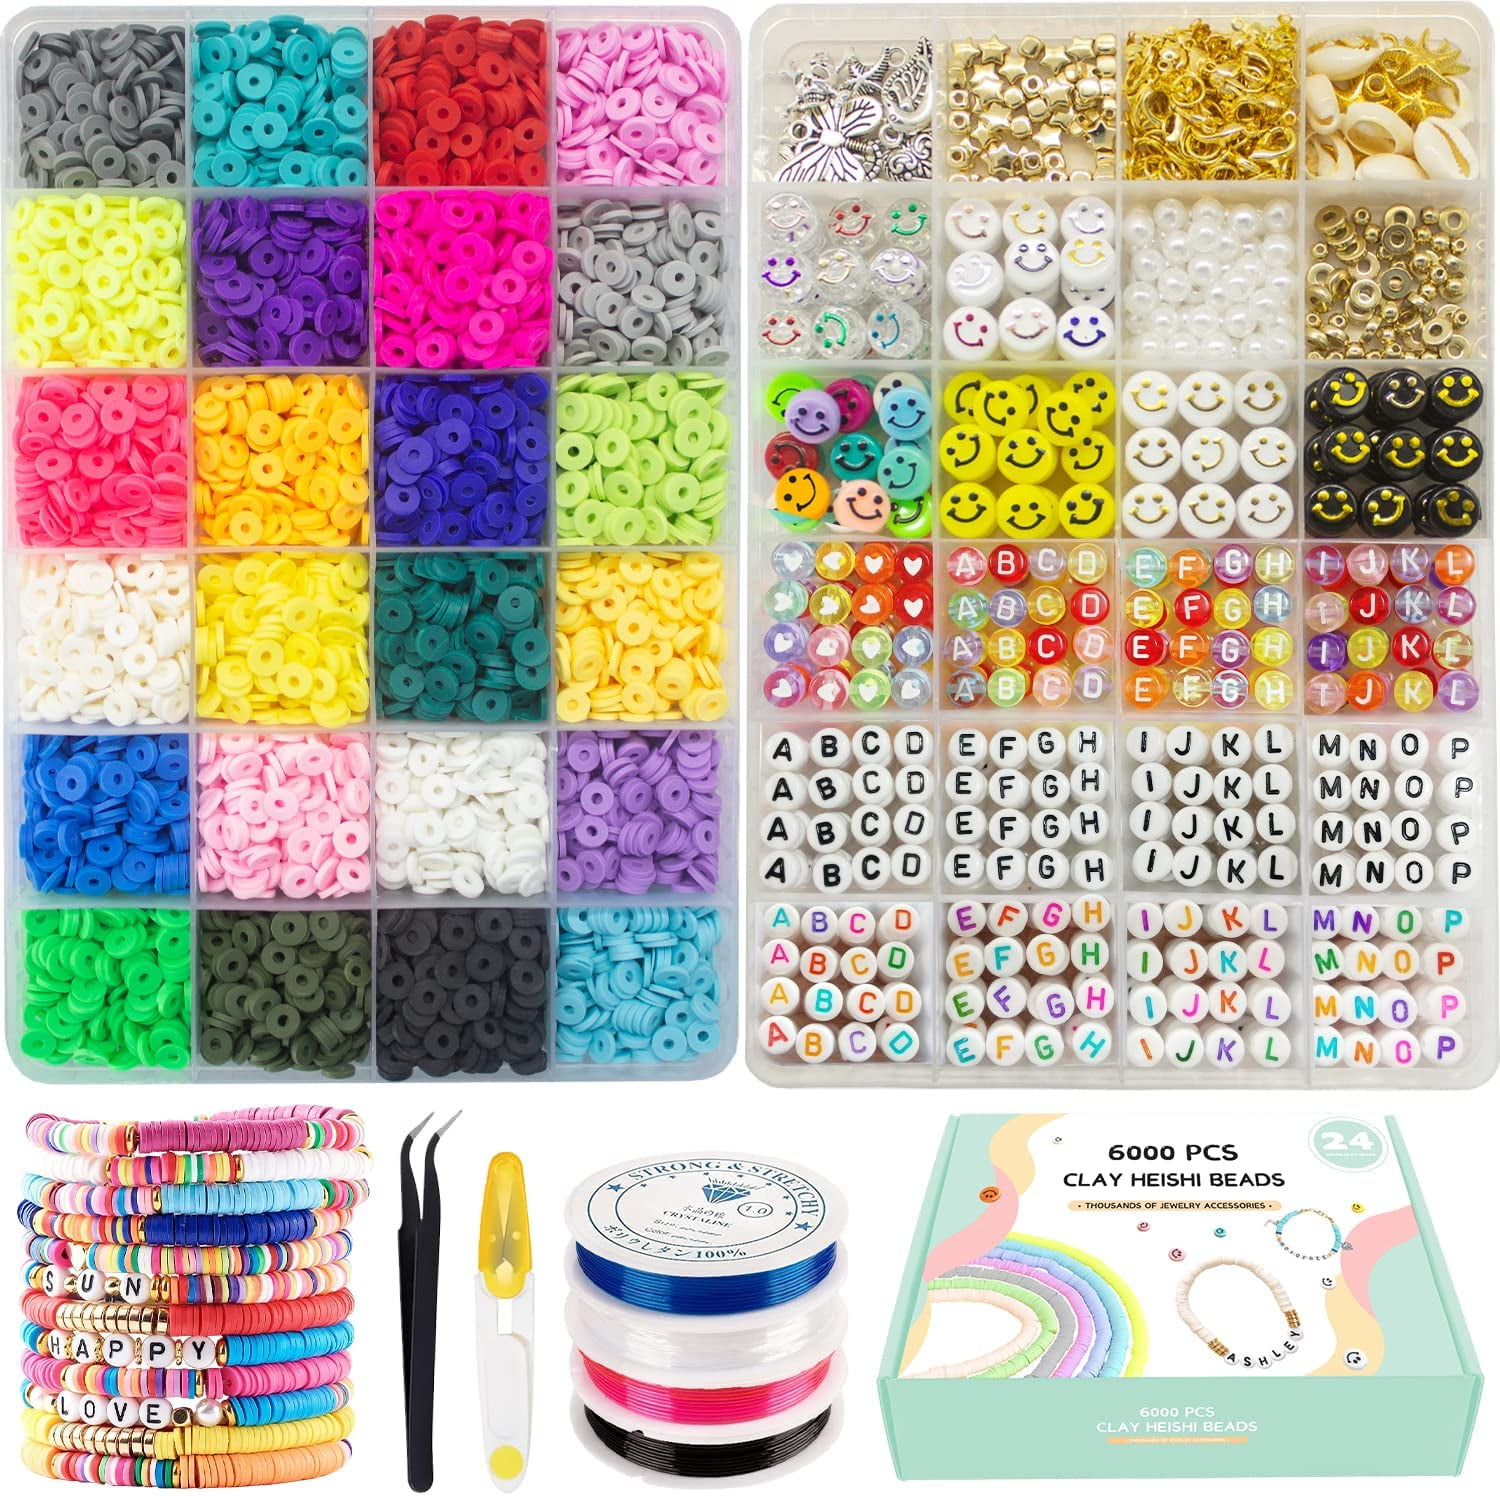 Hotbest 4284Pcs Clay Beads for Bracelet Making,20 Colors Flat Round Polymer Clay Heishi Beads with Pendant Charms Kit Letter Beads and Elastic Strings